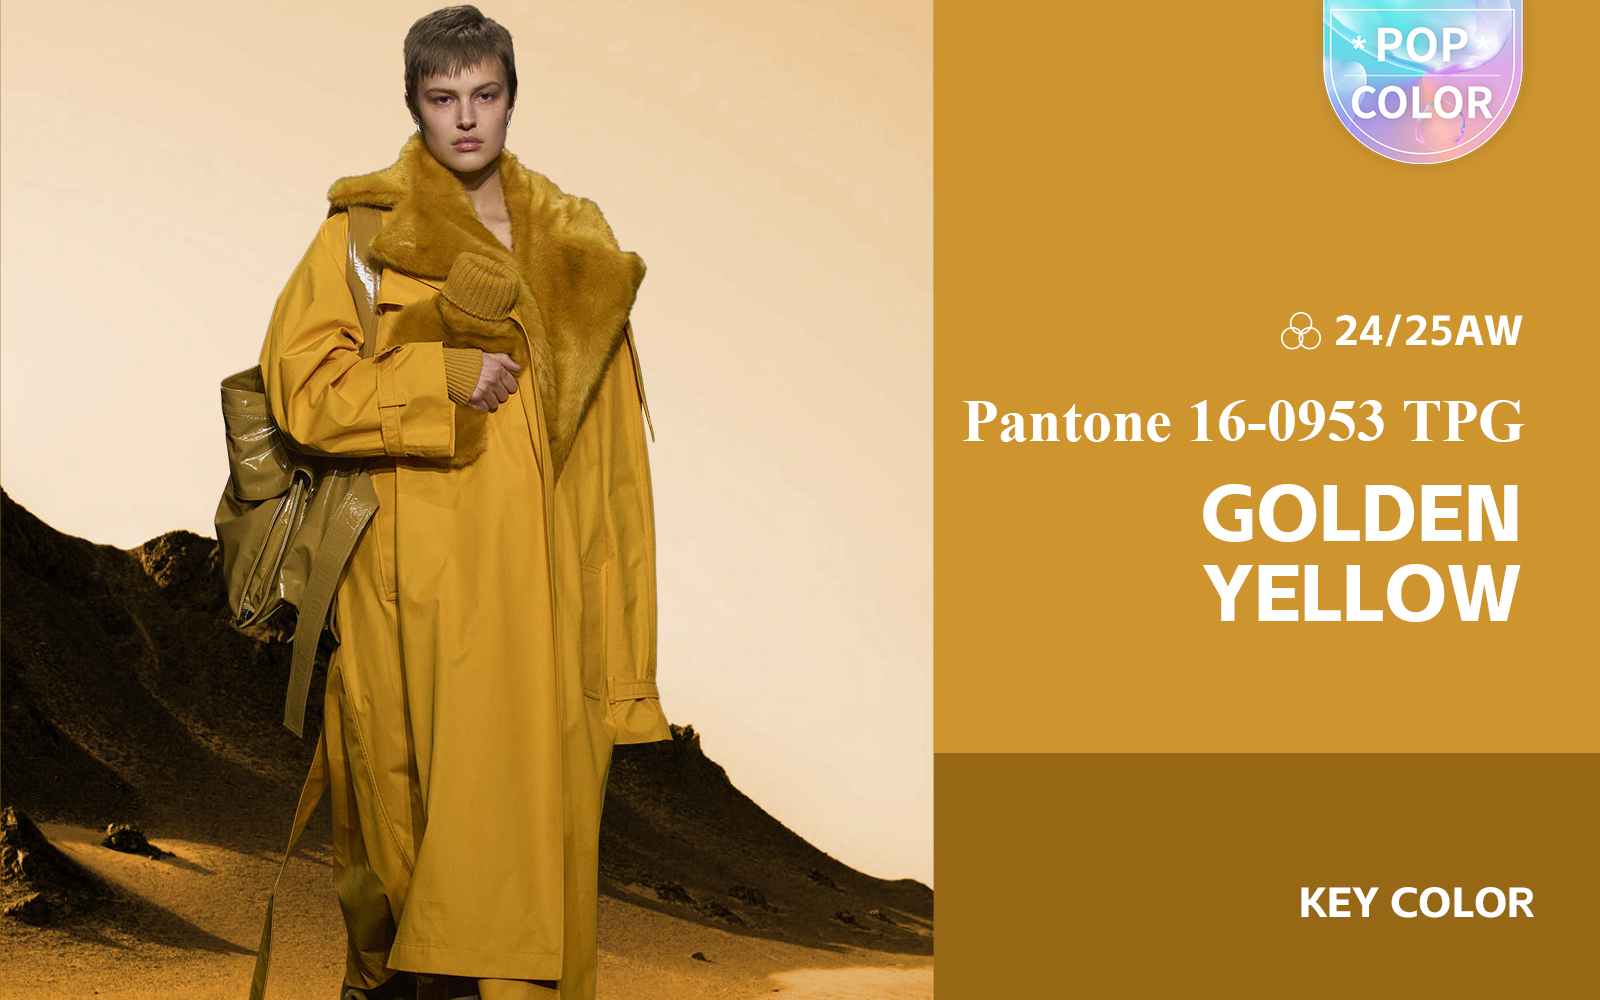 Golden Yellow -- The Color Trend for Womenswear